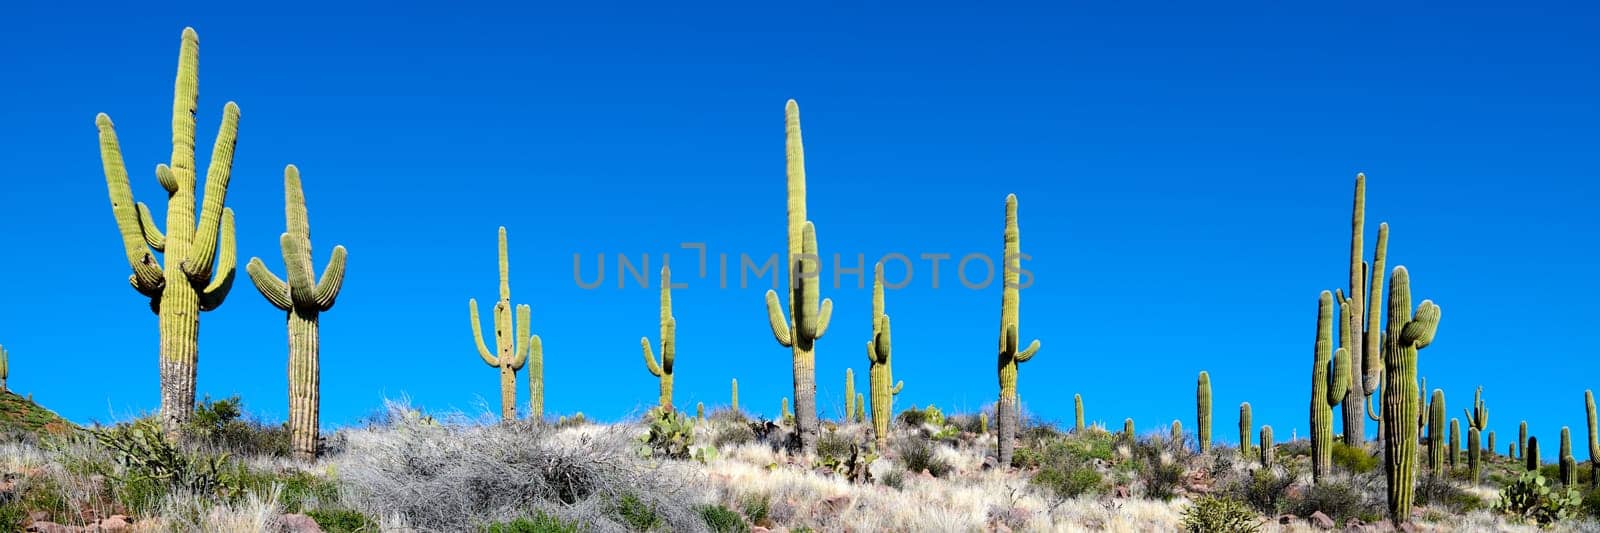 Saguaro Cactus growing on a rocky hillside in Tonto National Forest, Arizona